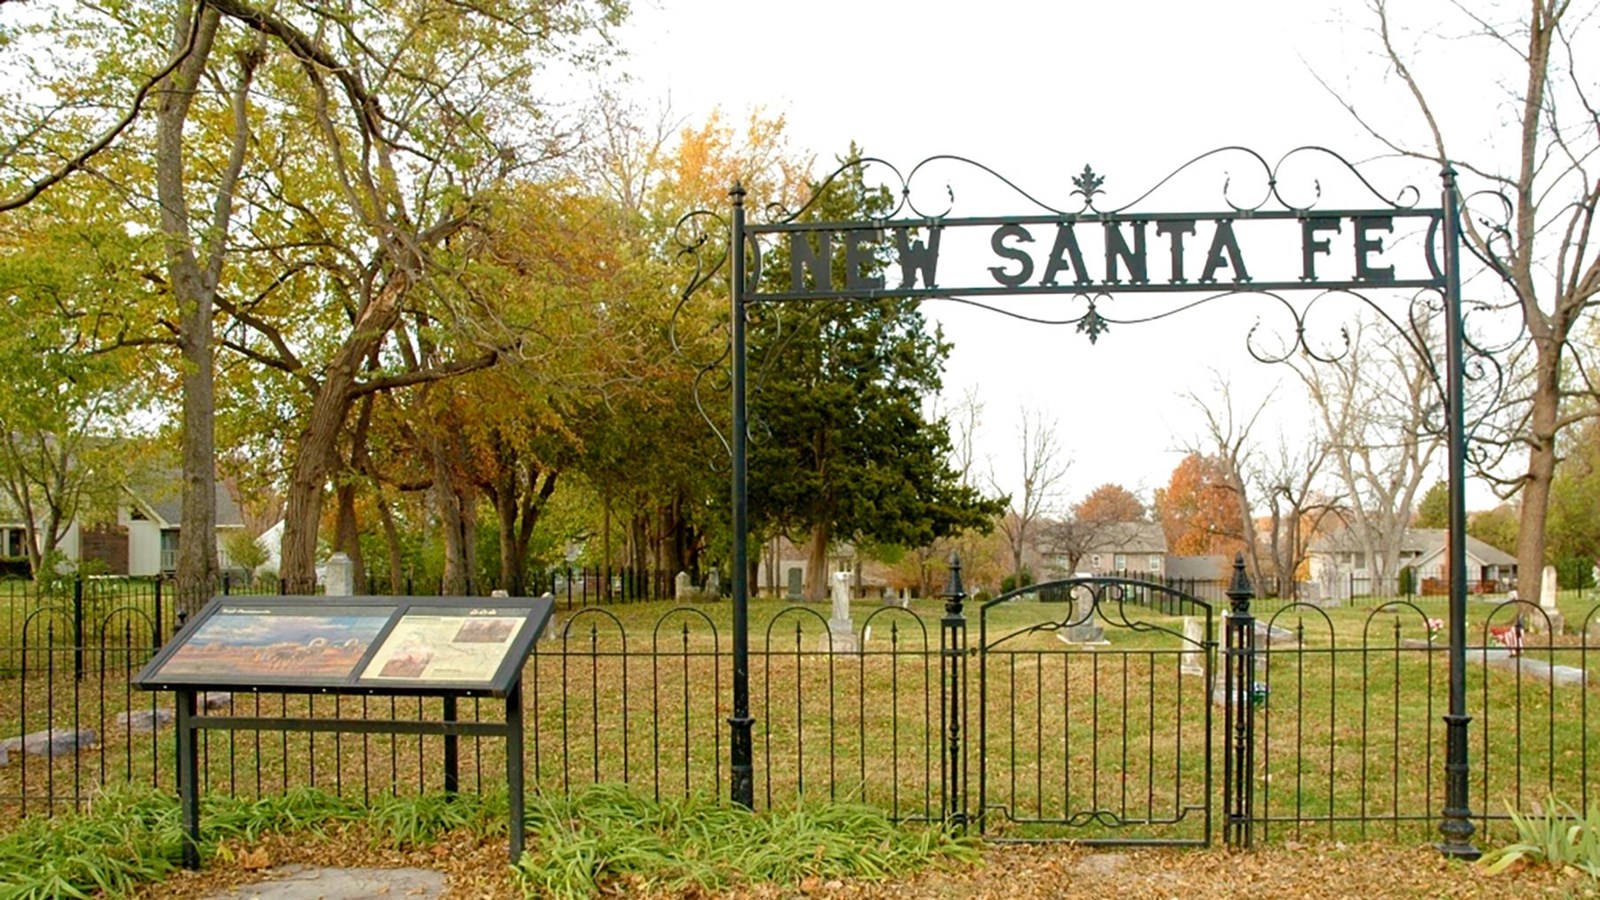 Cemetery entrance with sign reading New Santa Fe